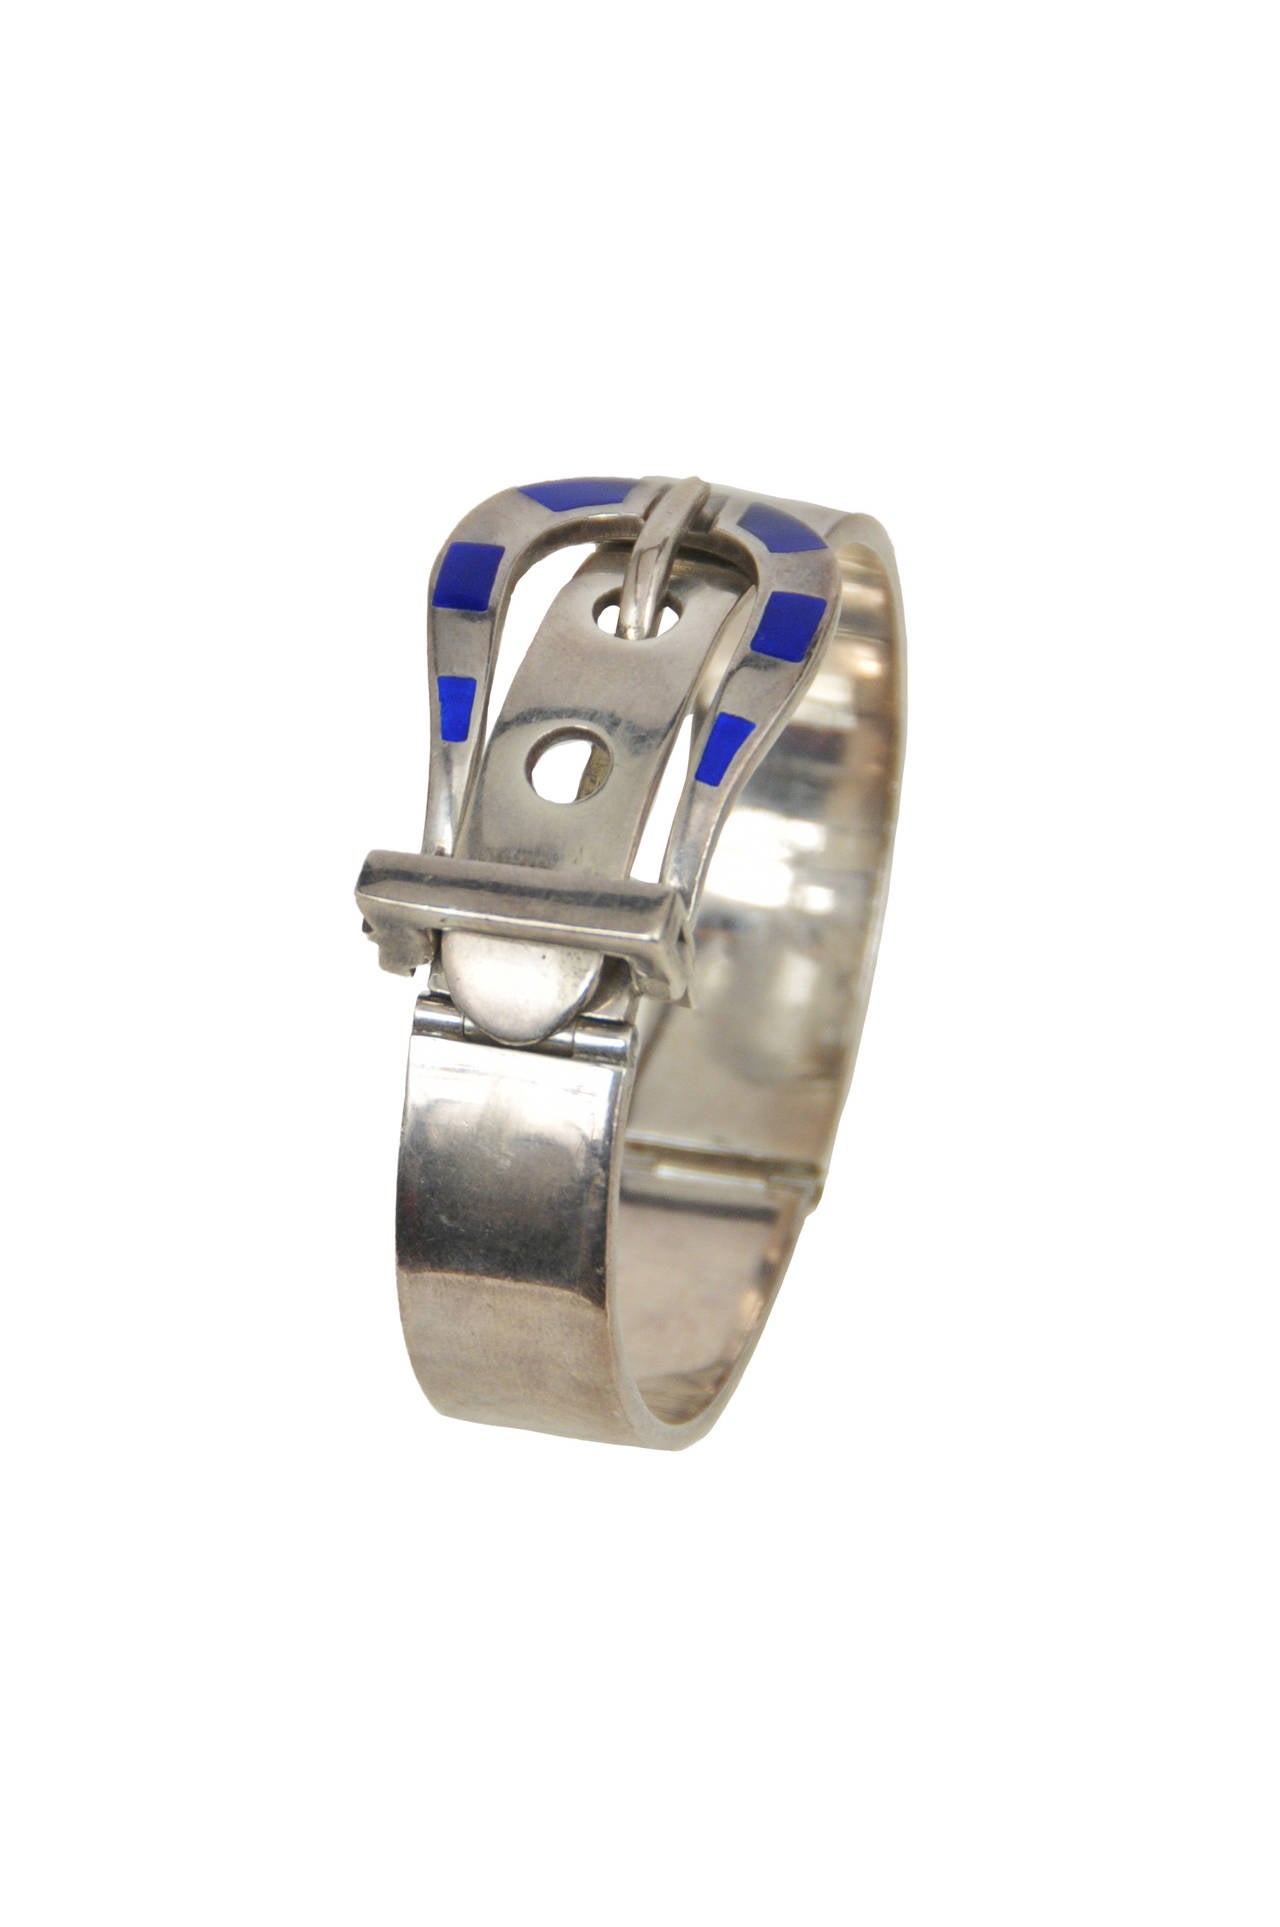 Vintage classic Gucci sterling silver and enamel buckle buckle bracelet.